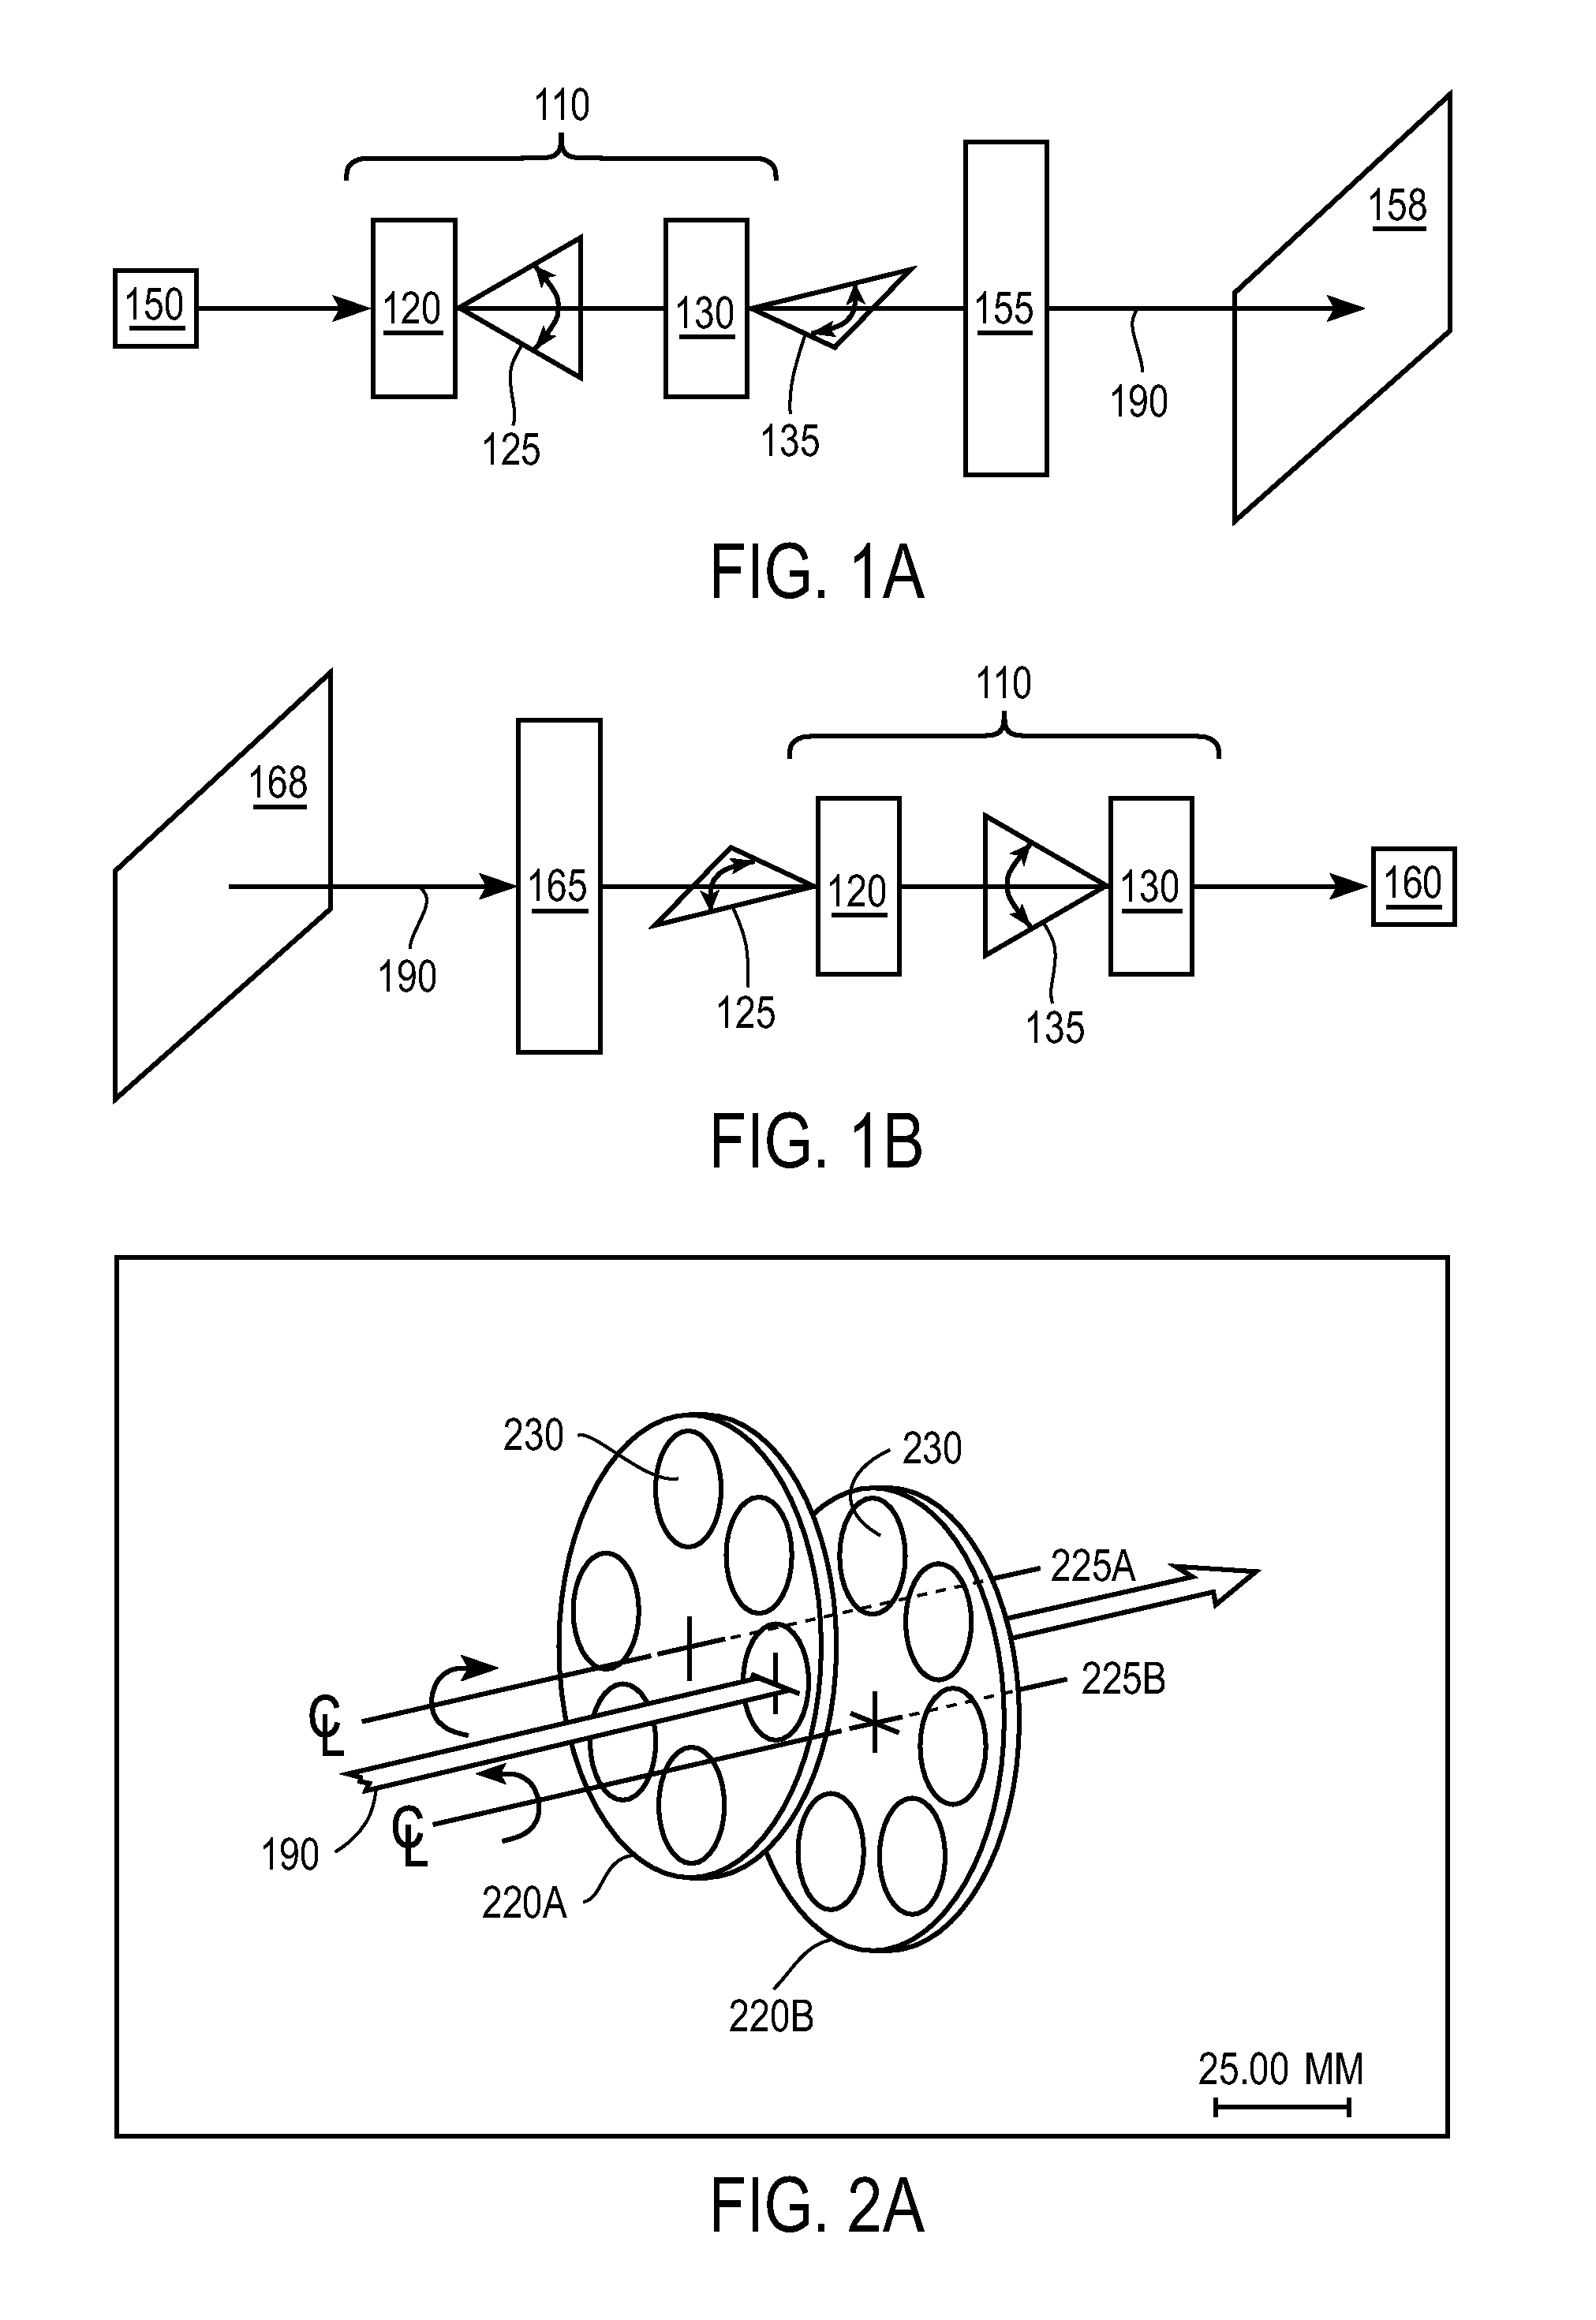 Two-dimensional optical scan system using a counter-rotating disk scanner